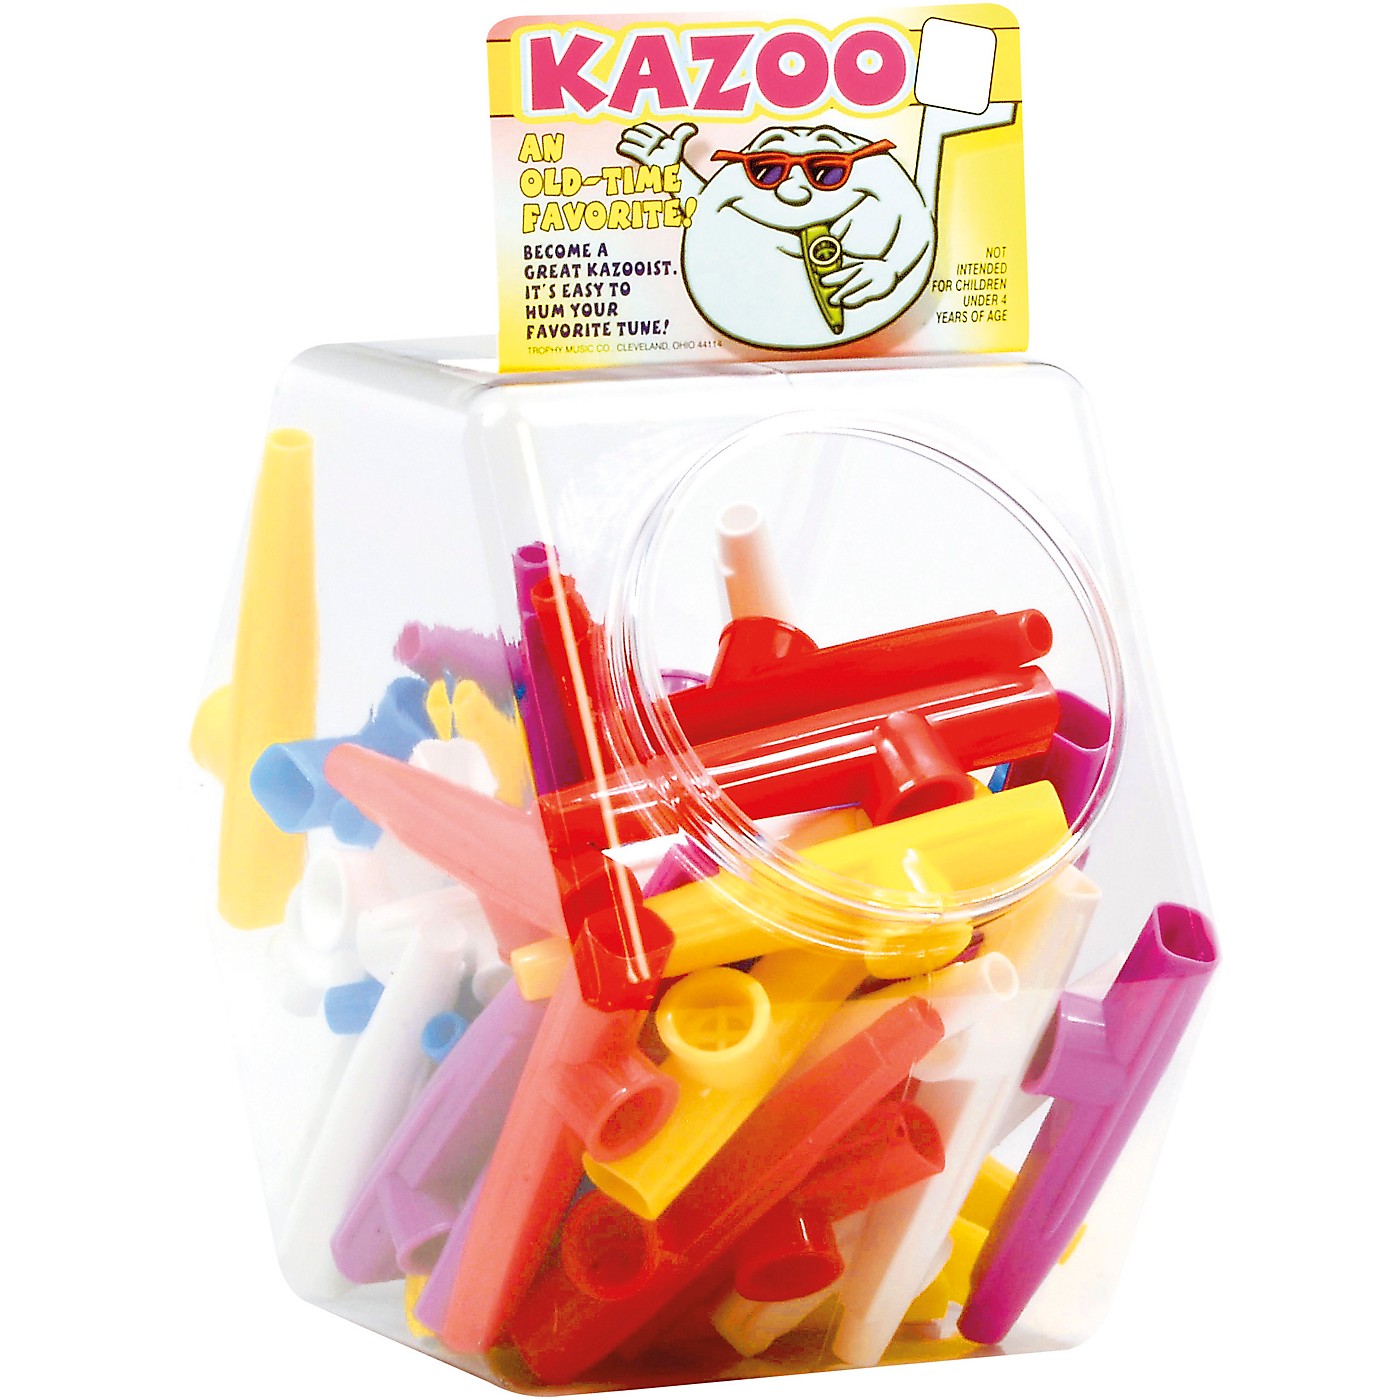 Grover-Trophy Kazoo in Various Colors thumbnail